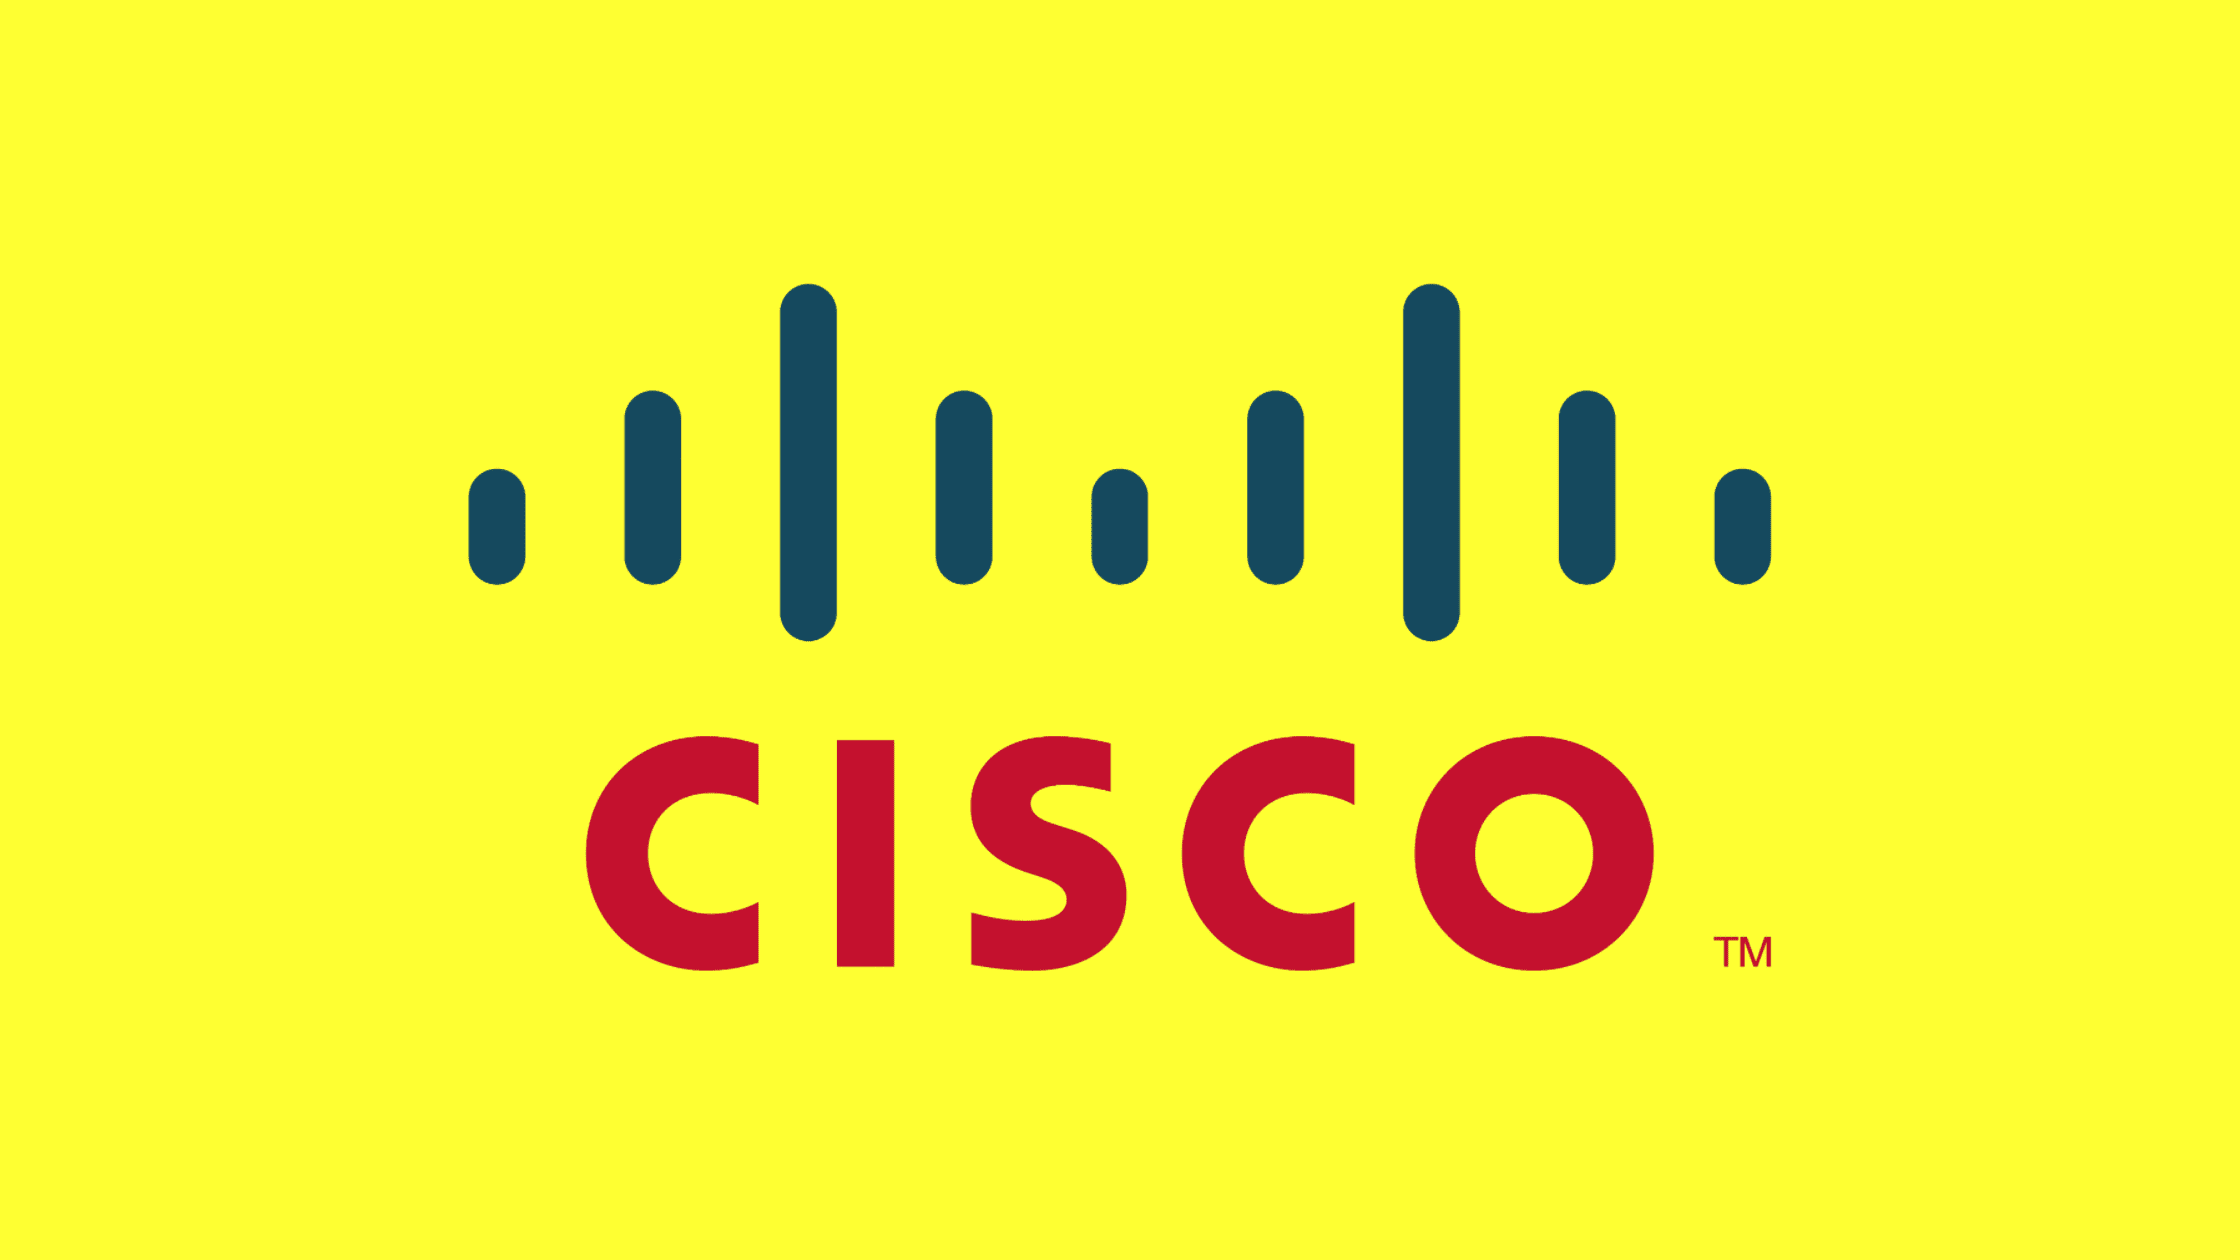 How To Fix Cve 2023 20025 And Cve 2023 20026 Authentication Bypass And Remote Command Execution Vulnerabilities In Cisco Small Business Routers